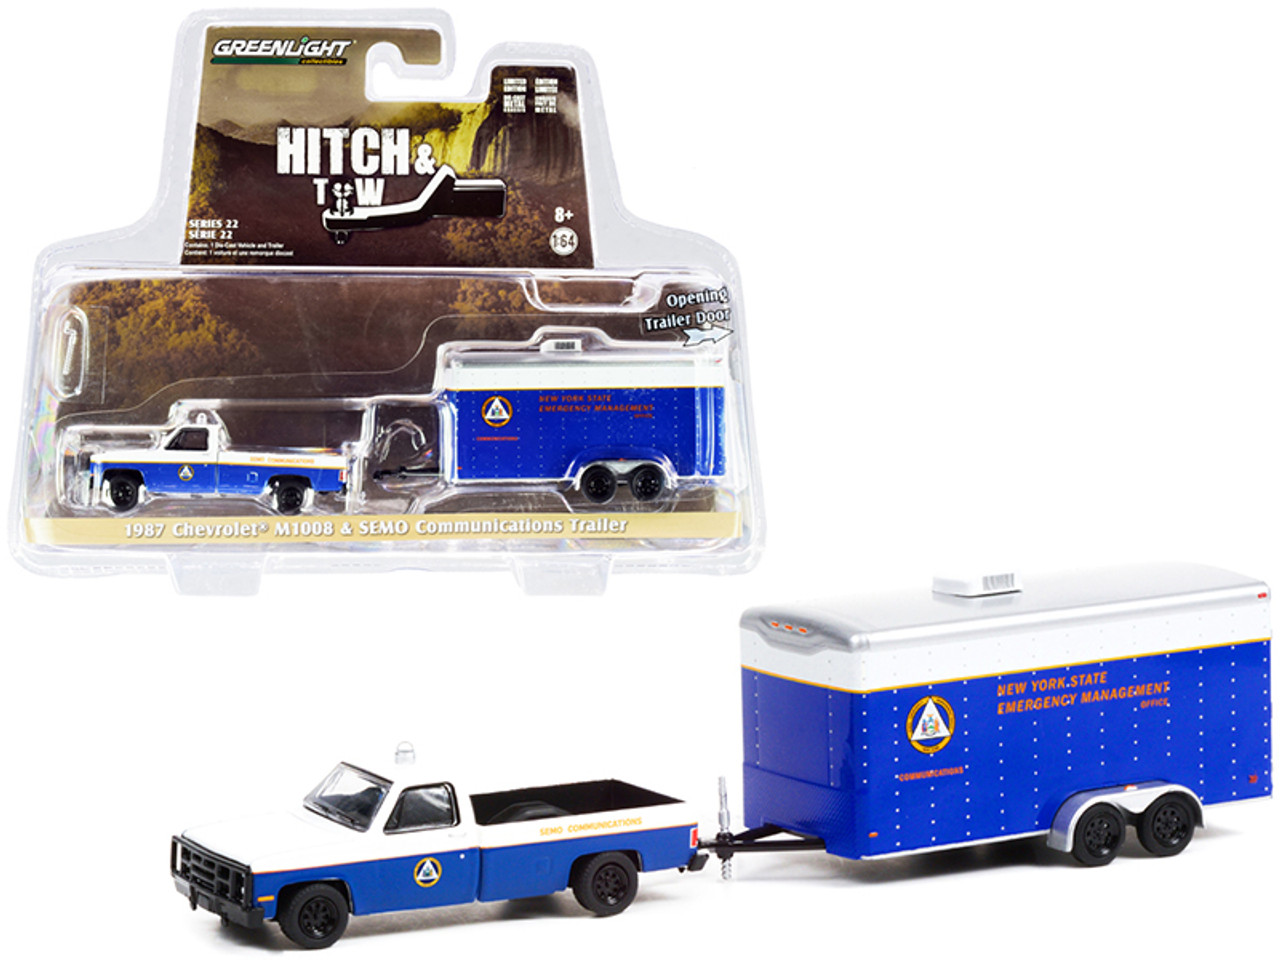 1987 Chevrolet M1008 Pickup Truck Blue and White with Communications Trailer (SEMO) "New York State Emergency Management Office" "Hitch & Tow" Series 22 1/64 Diecast Model Car by Greenlight